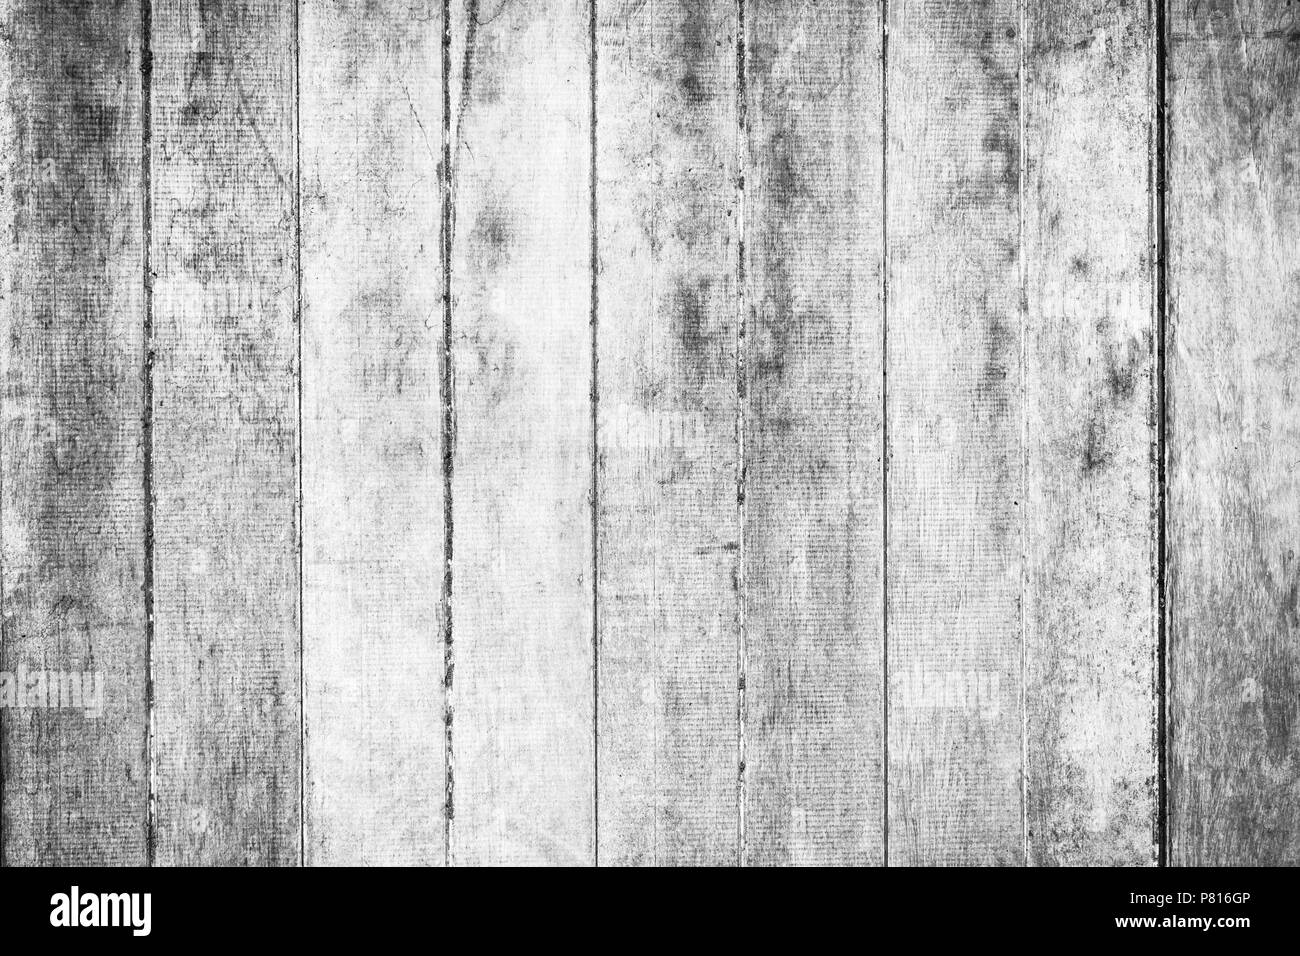 Wooden wall texture in black and white rustic background. Stock Photo